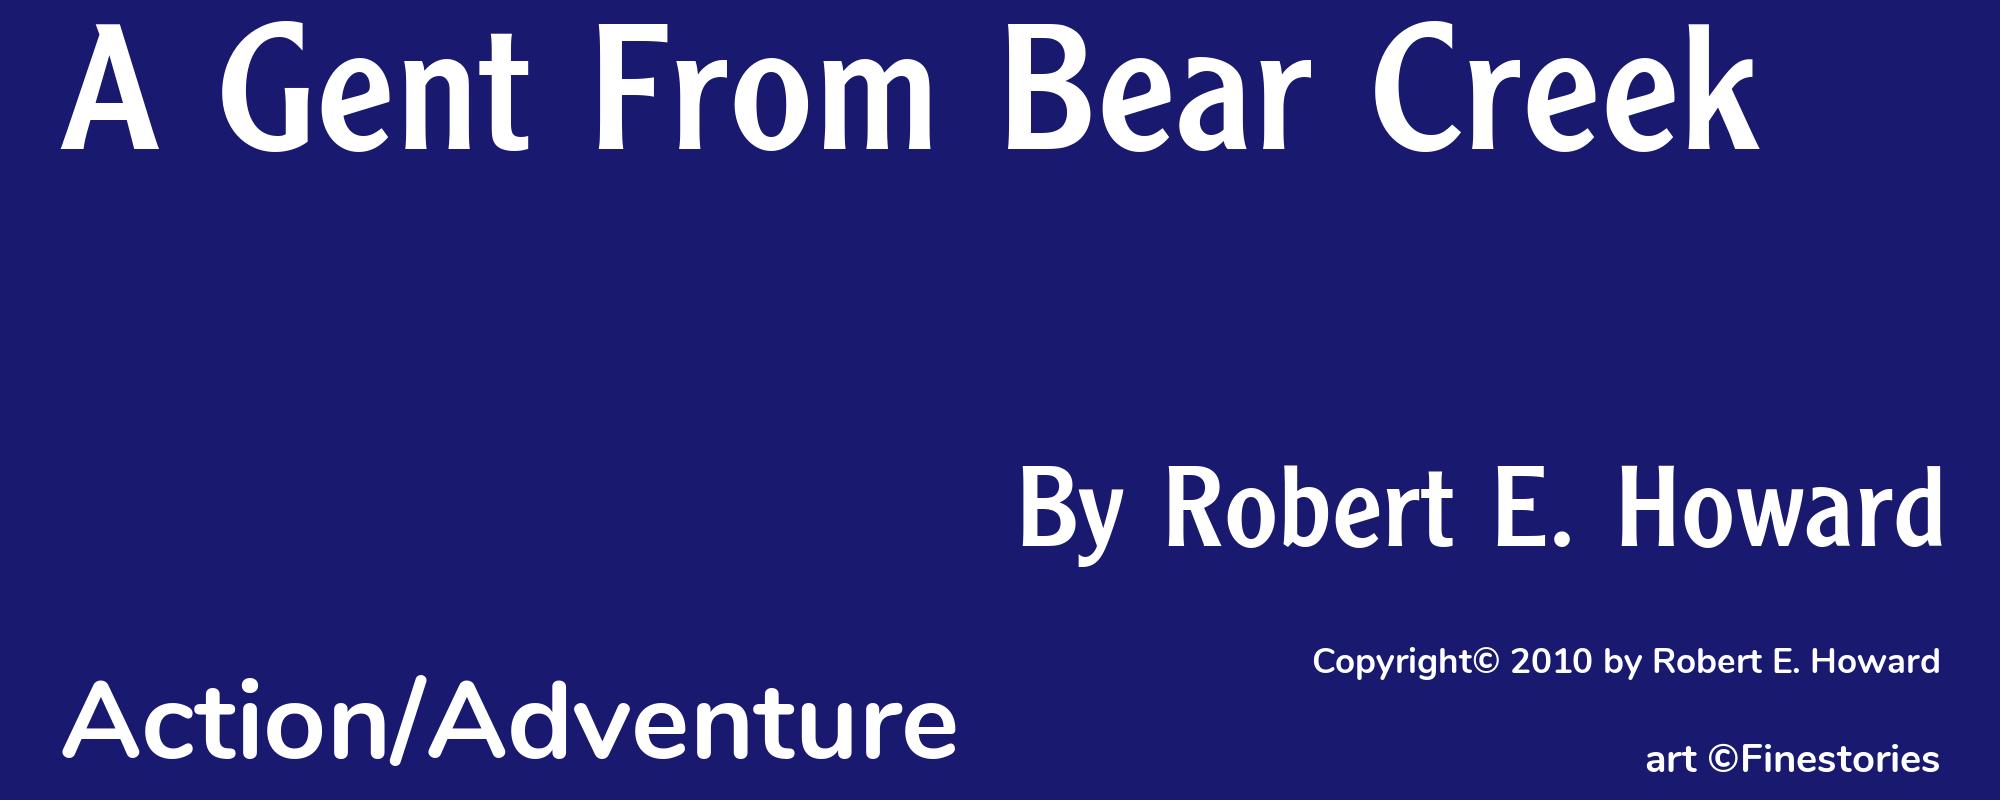 A Gent From Bear Creek - Cover